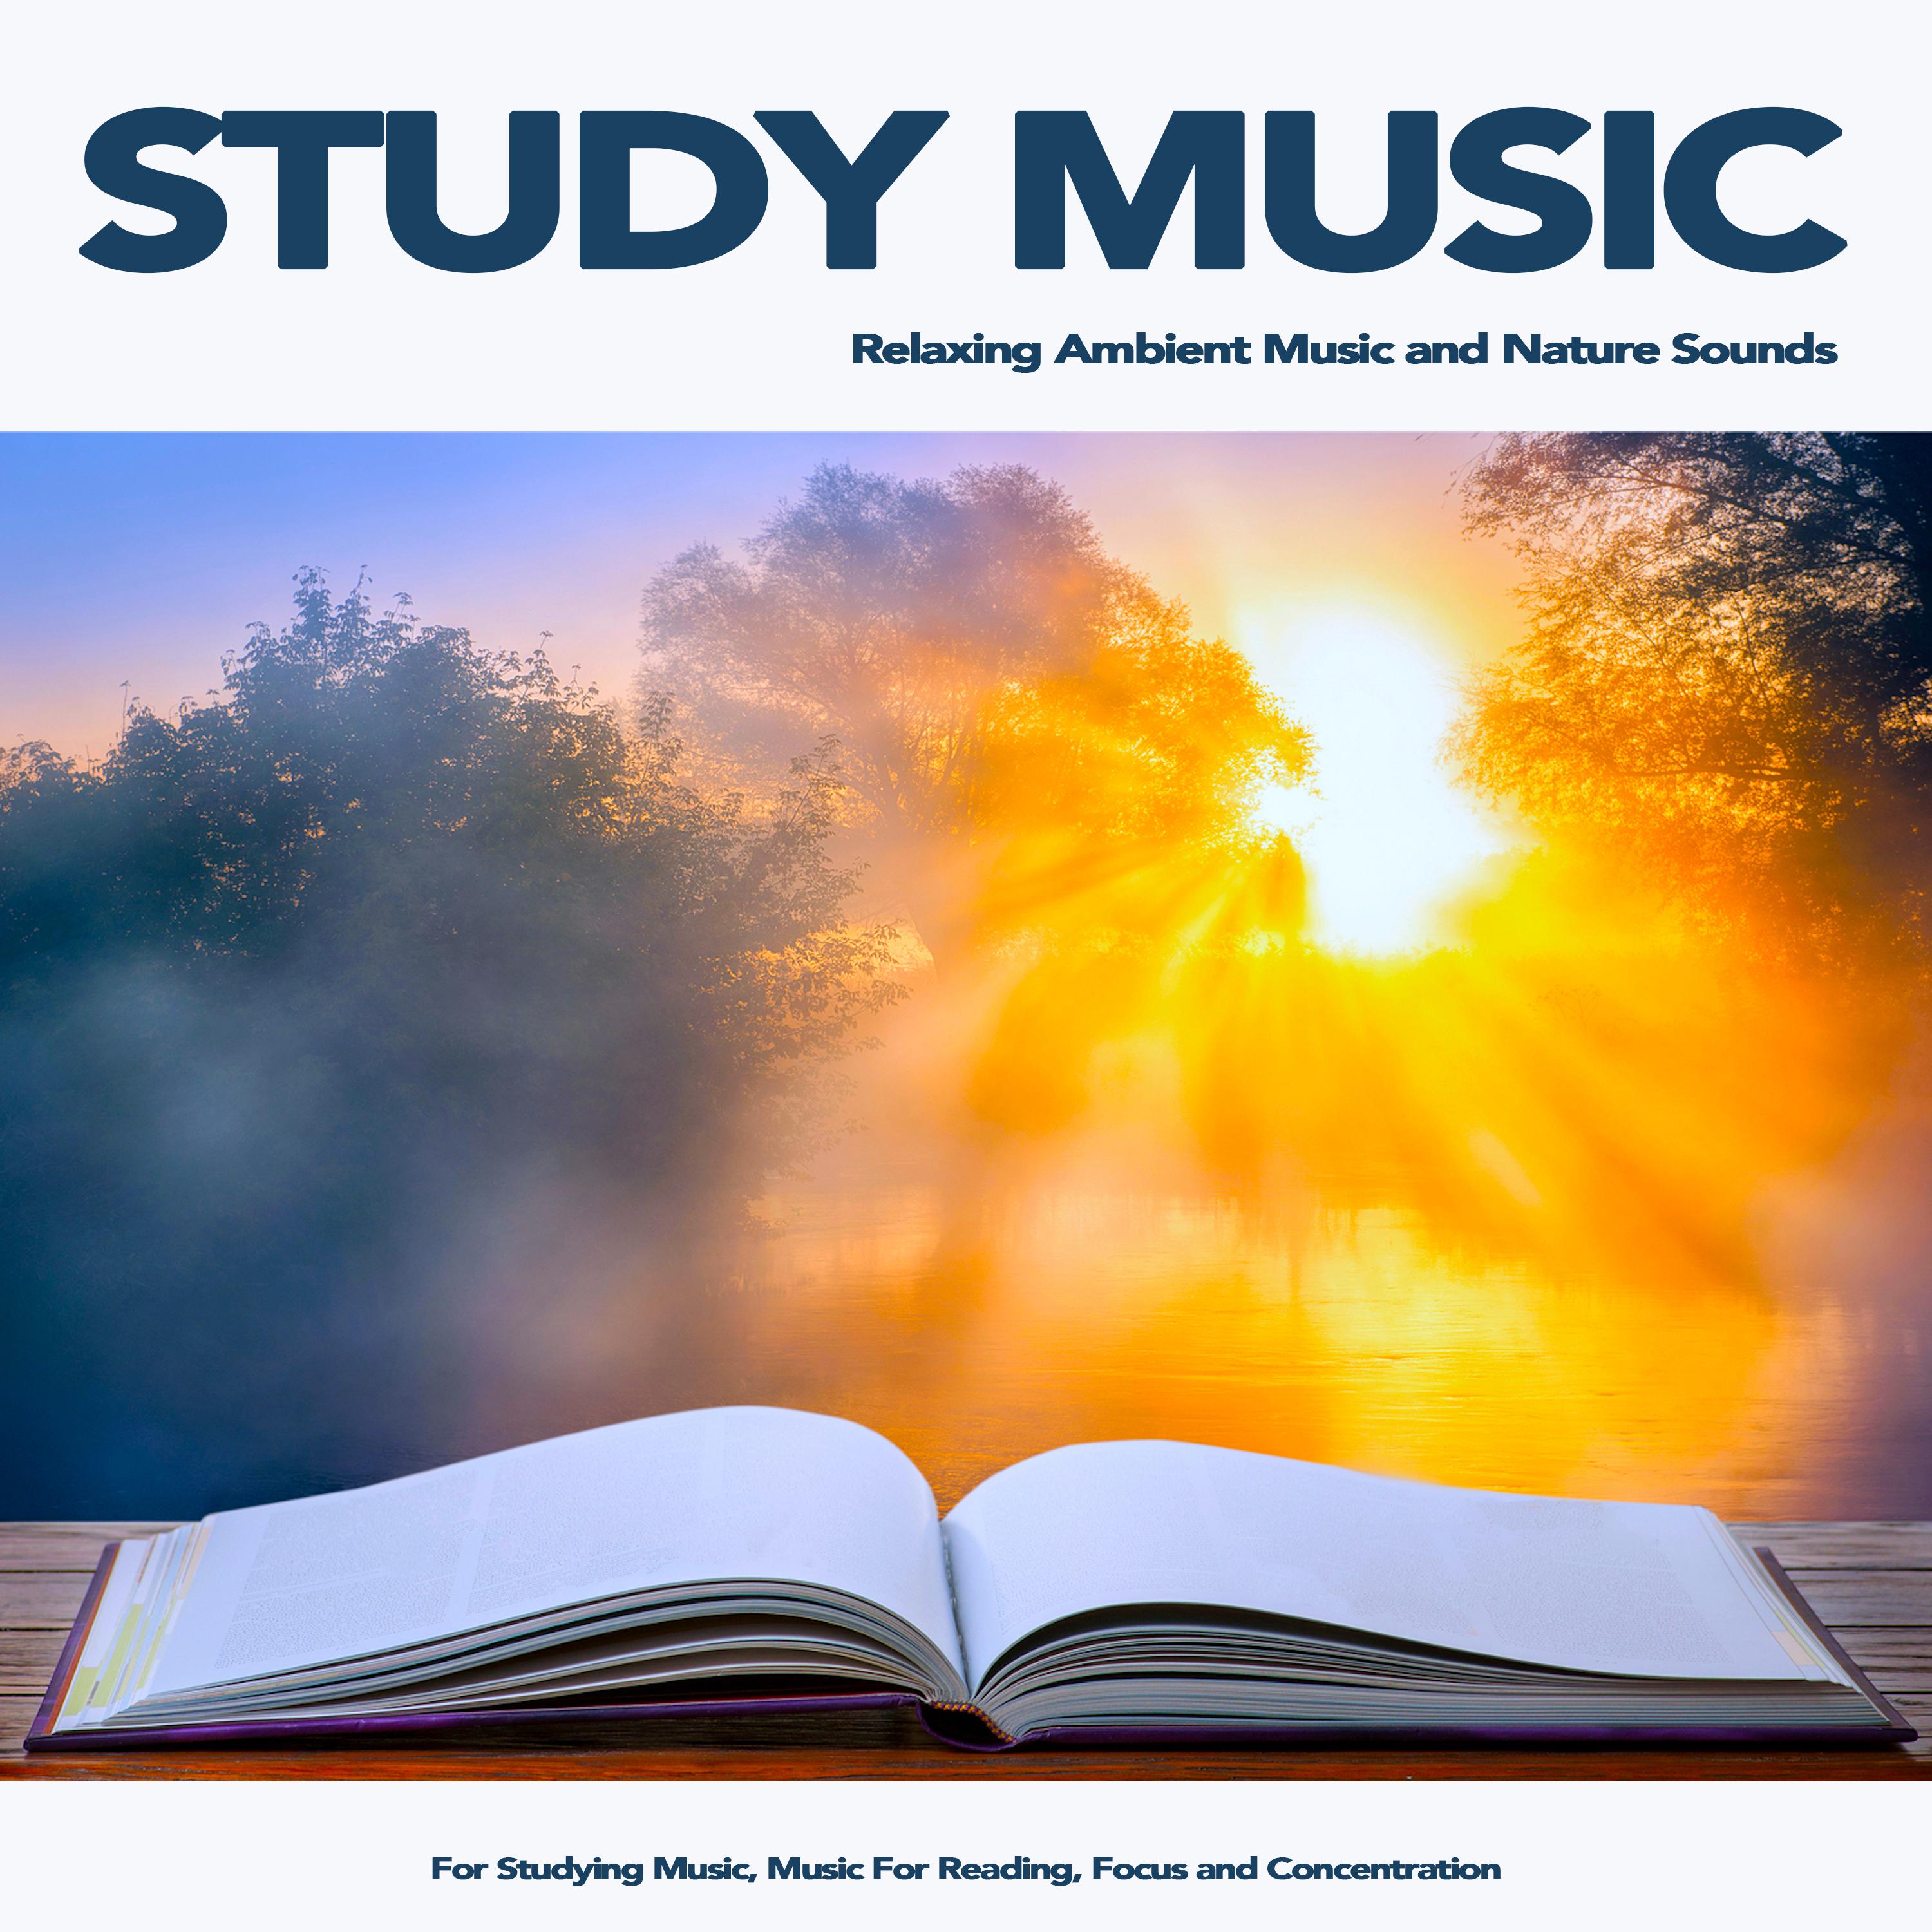 Study Music: Relaxing Ambient Music and Nature Sounds For Studying Music, Music For Reading, Focus and Concentration